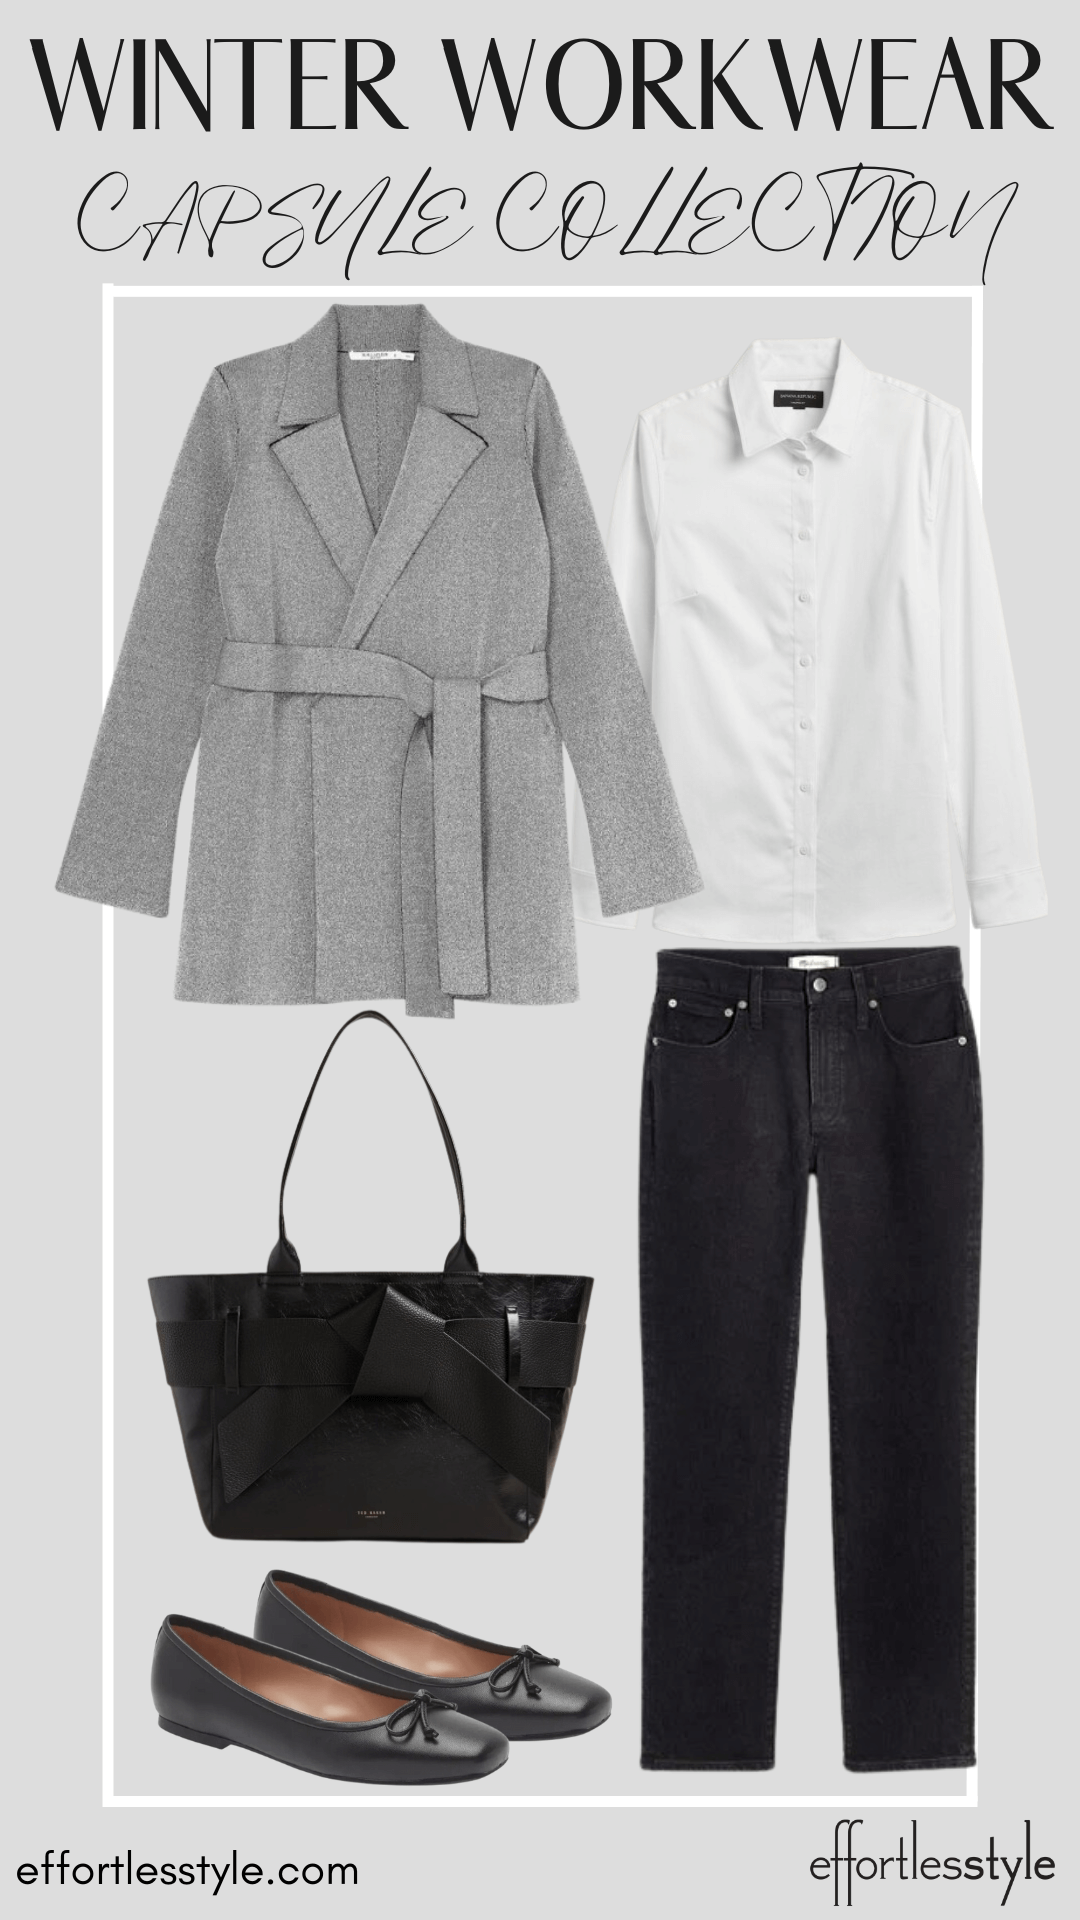 How To Wear Our Winter Workwear Capsule Wardrobe - Part 2 Sweater Blazer & Black Jeans & Button-Up Shirt how to wear a sweater blazer with black jean ways to style your black jeans for the office how to dress your black jeans up Nashville area stylists share outfit ideas for work